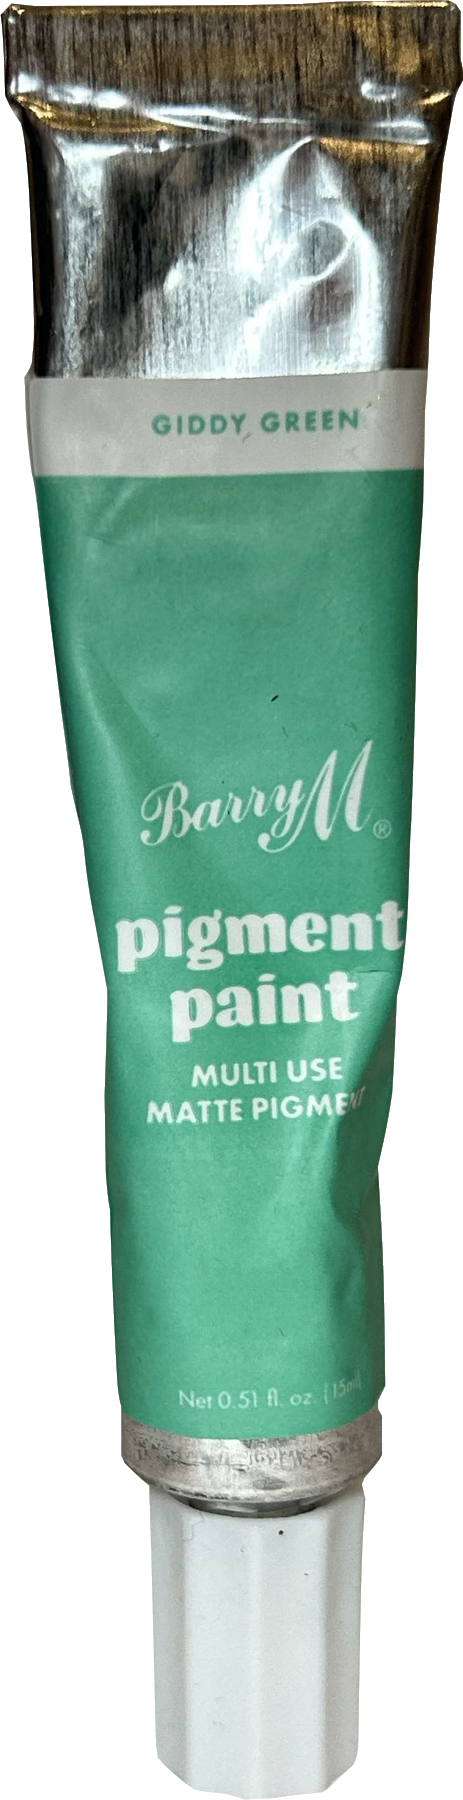 Barry M Face & Body Pigment Paint Giddy Green 15ml